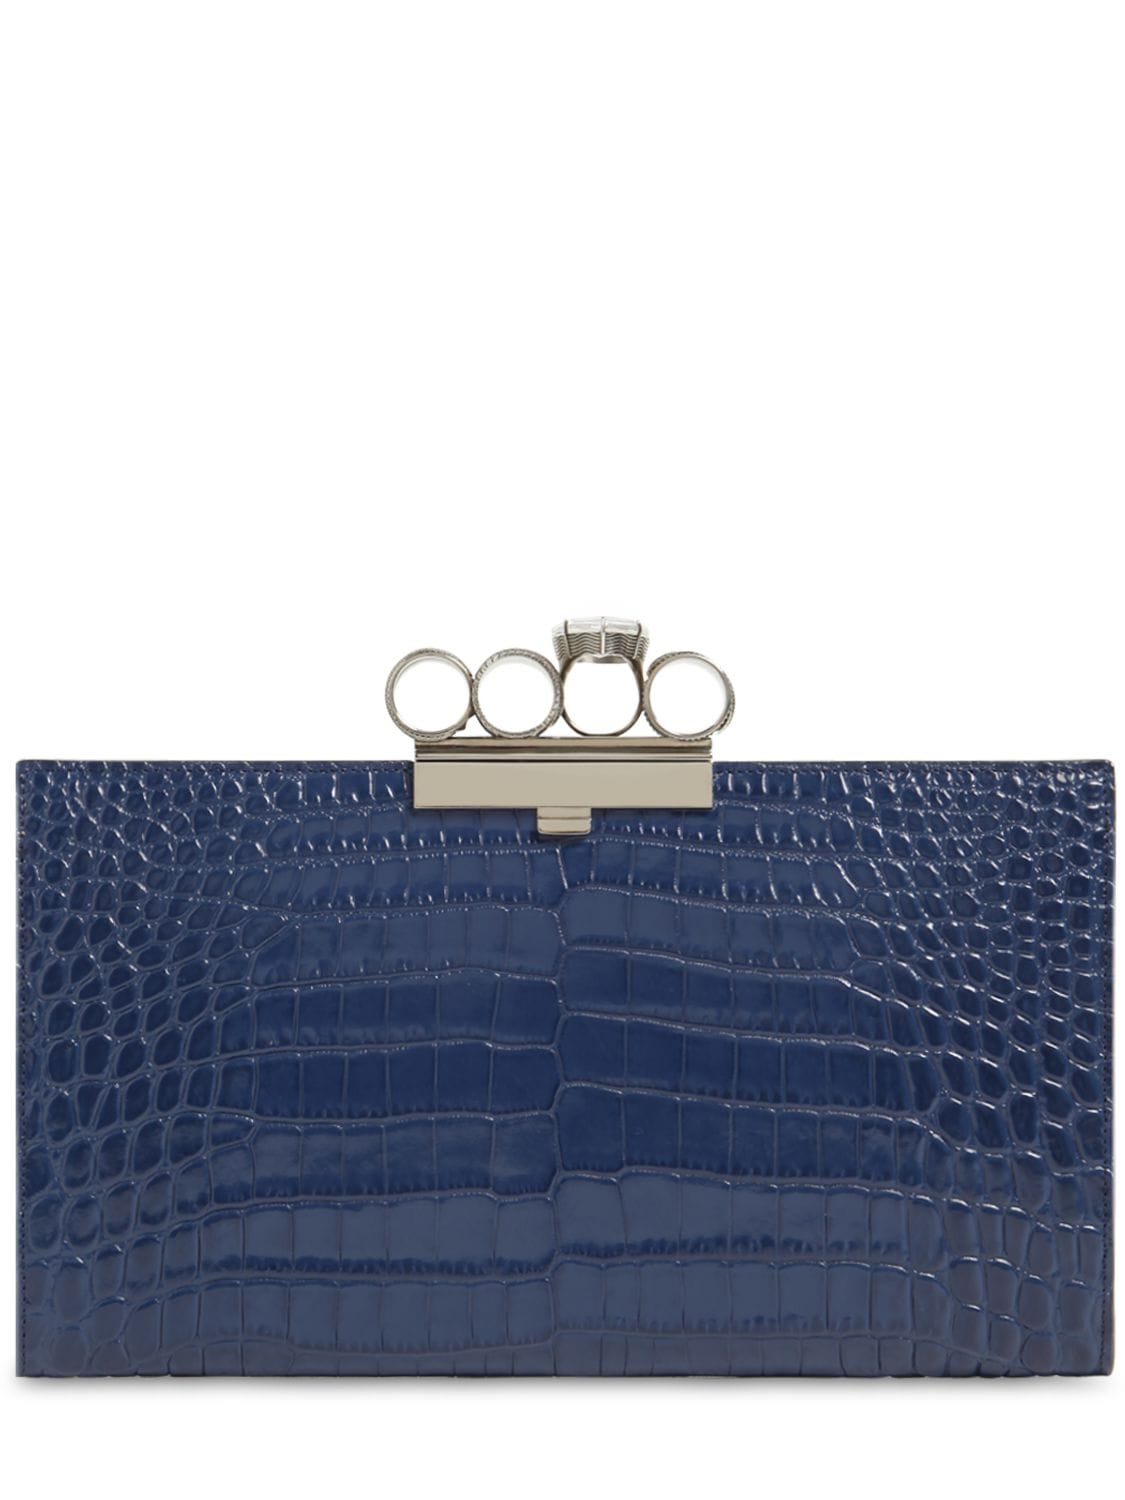 ALEXANDER MCQUEEN FOUR RING CROC EMBOSSED LEATHER CLUTCH,70IRL6006-NDAXNQ2